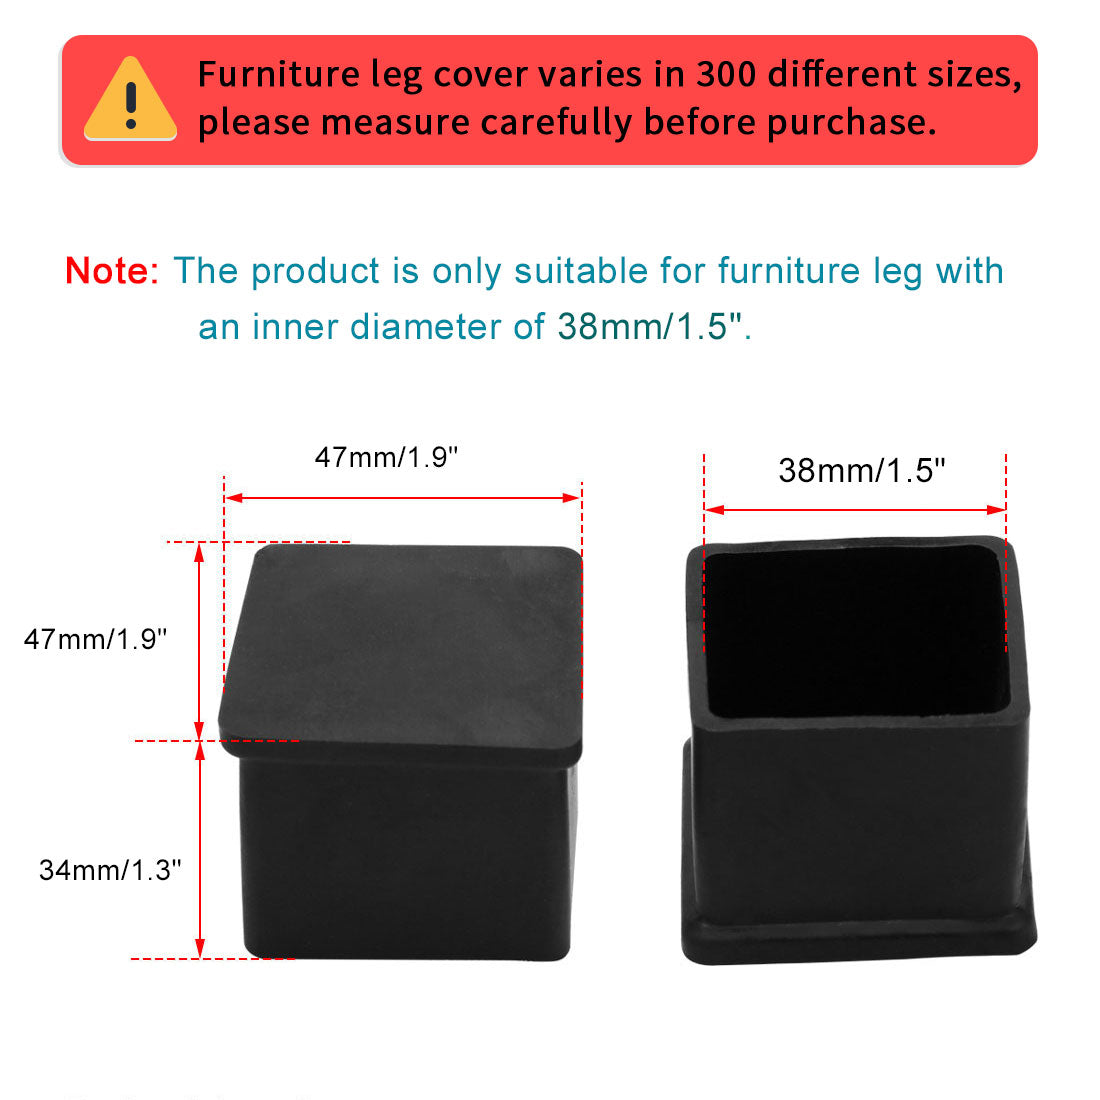 uxcell Uxcell Home Furniture Rubber Floor Protector Table Chair Foot Leg Cover Pad 38 x 38mm 8pcs